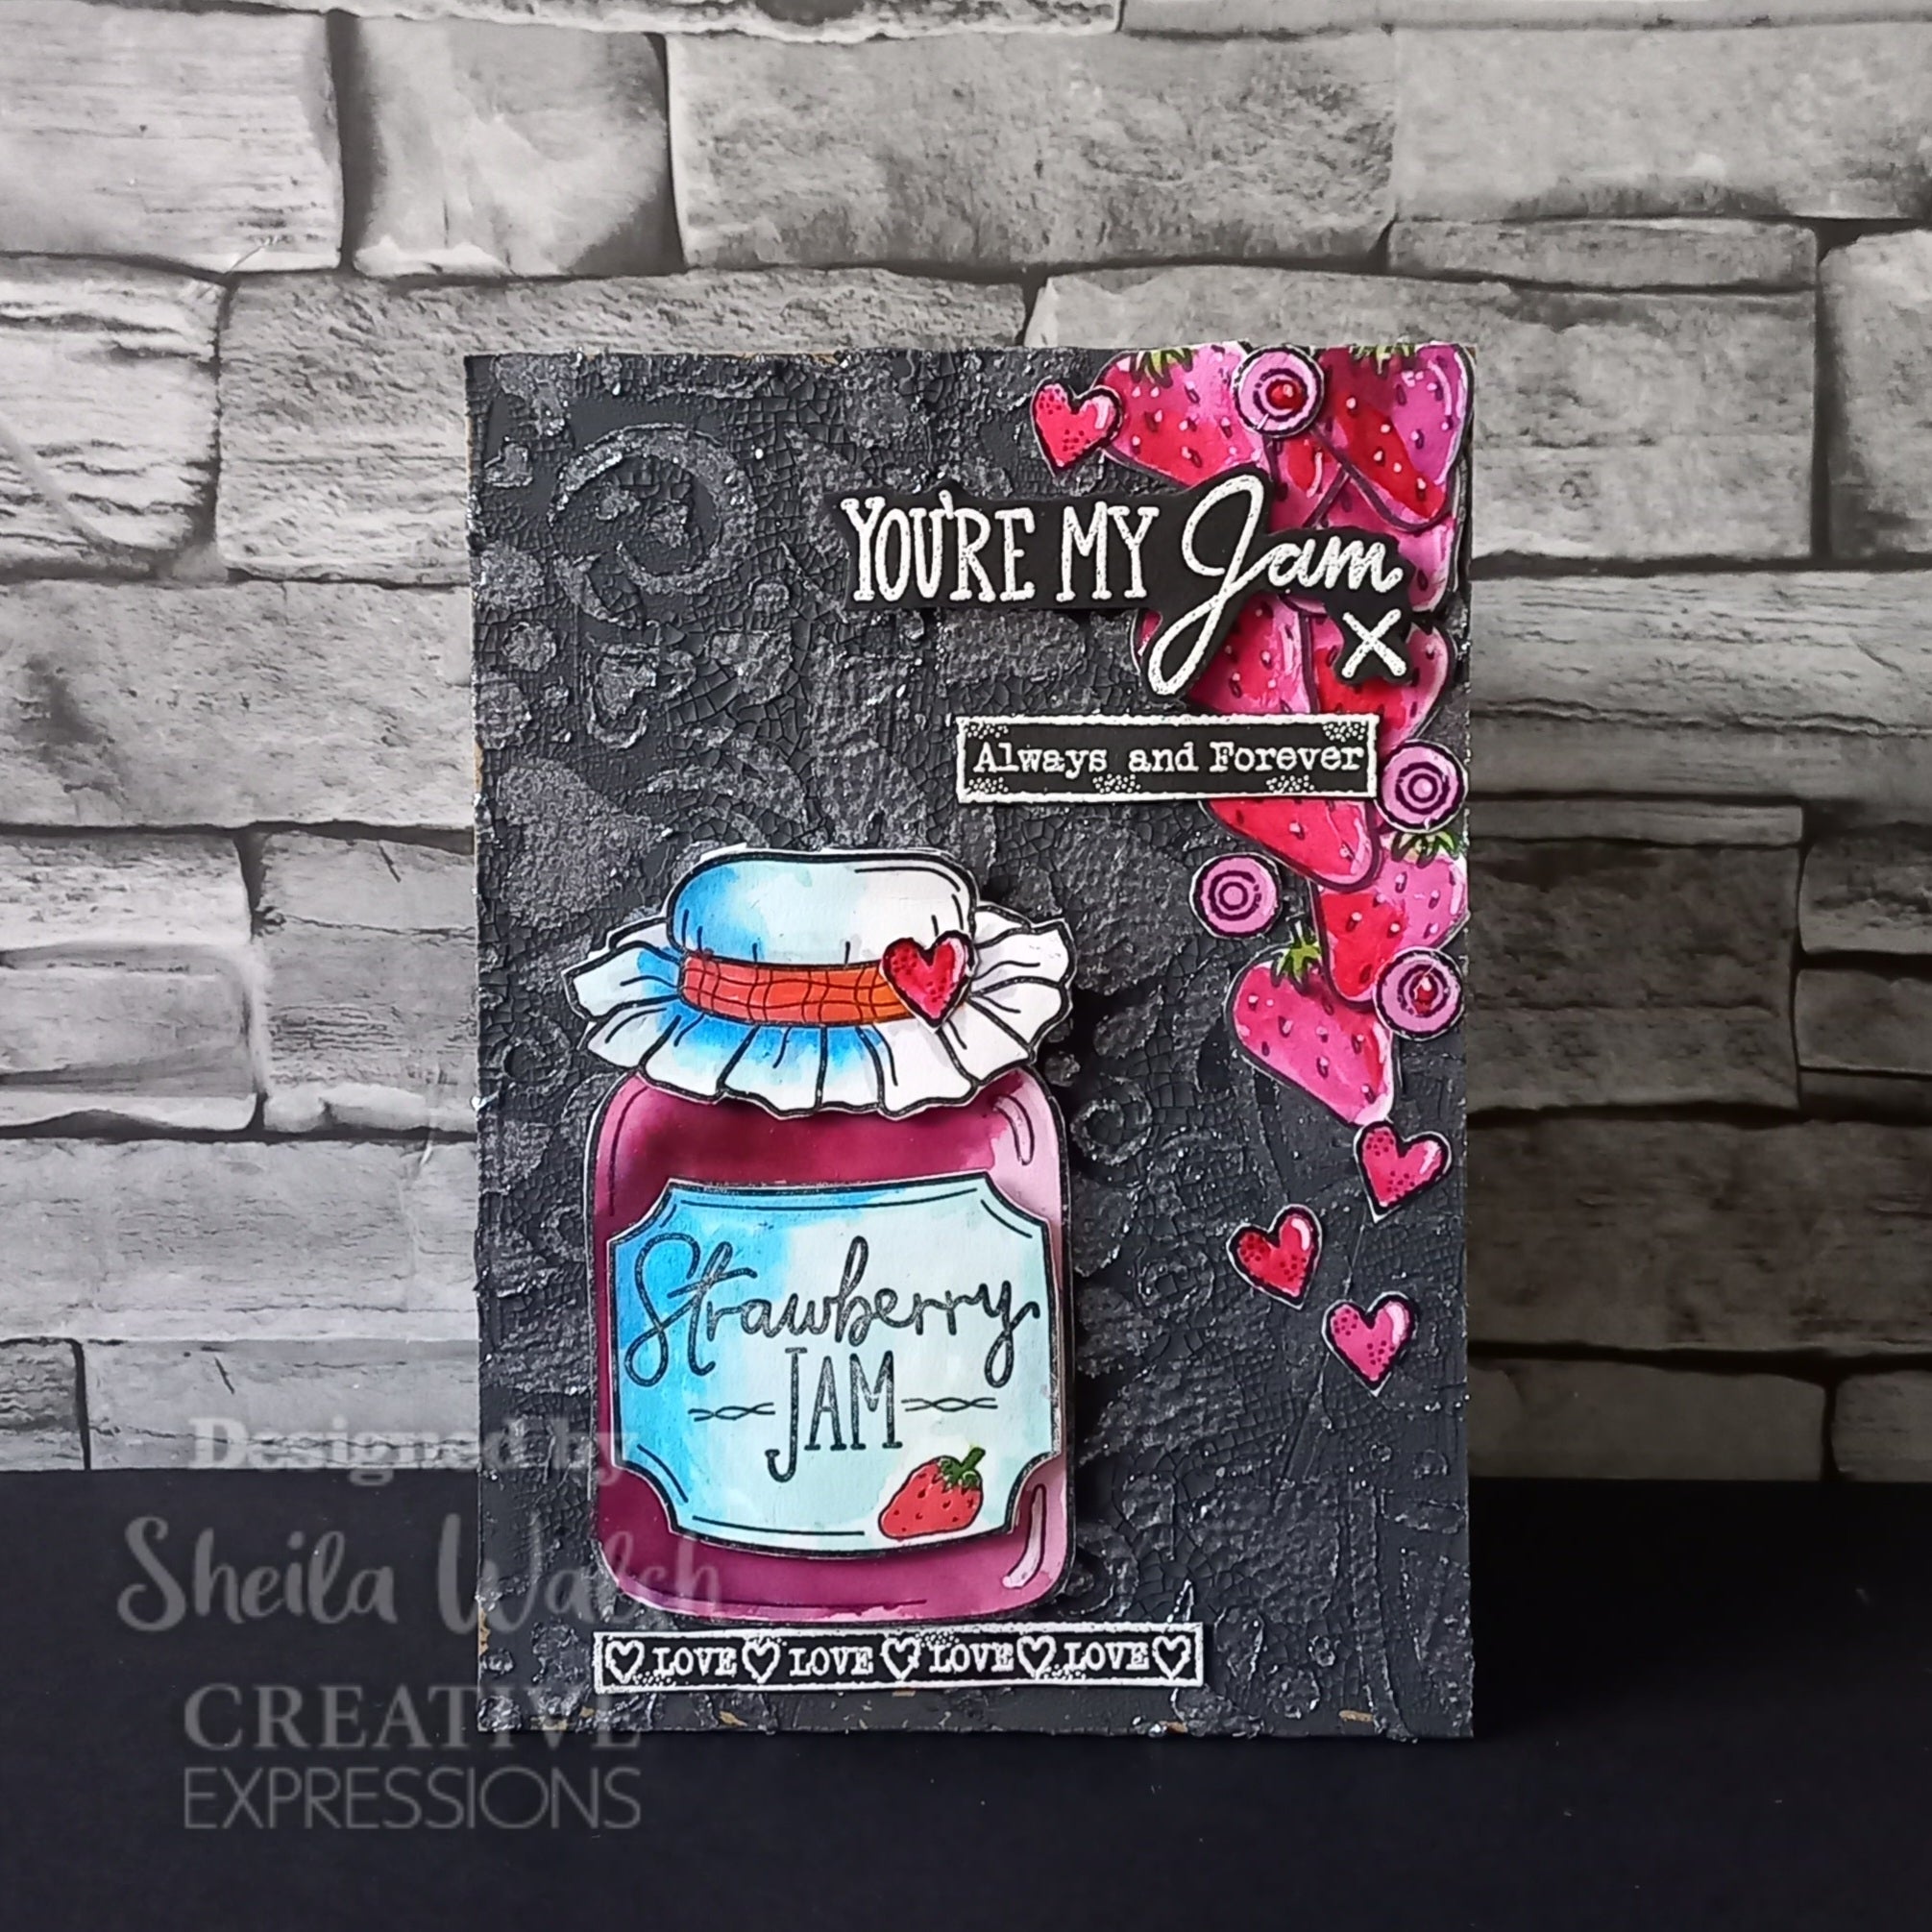 Creative Expressions Swirling Hearts DL Stencil 4 in x 8 in (10.0 x 20.3 cm)